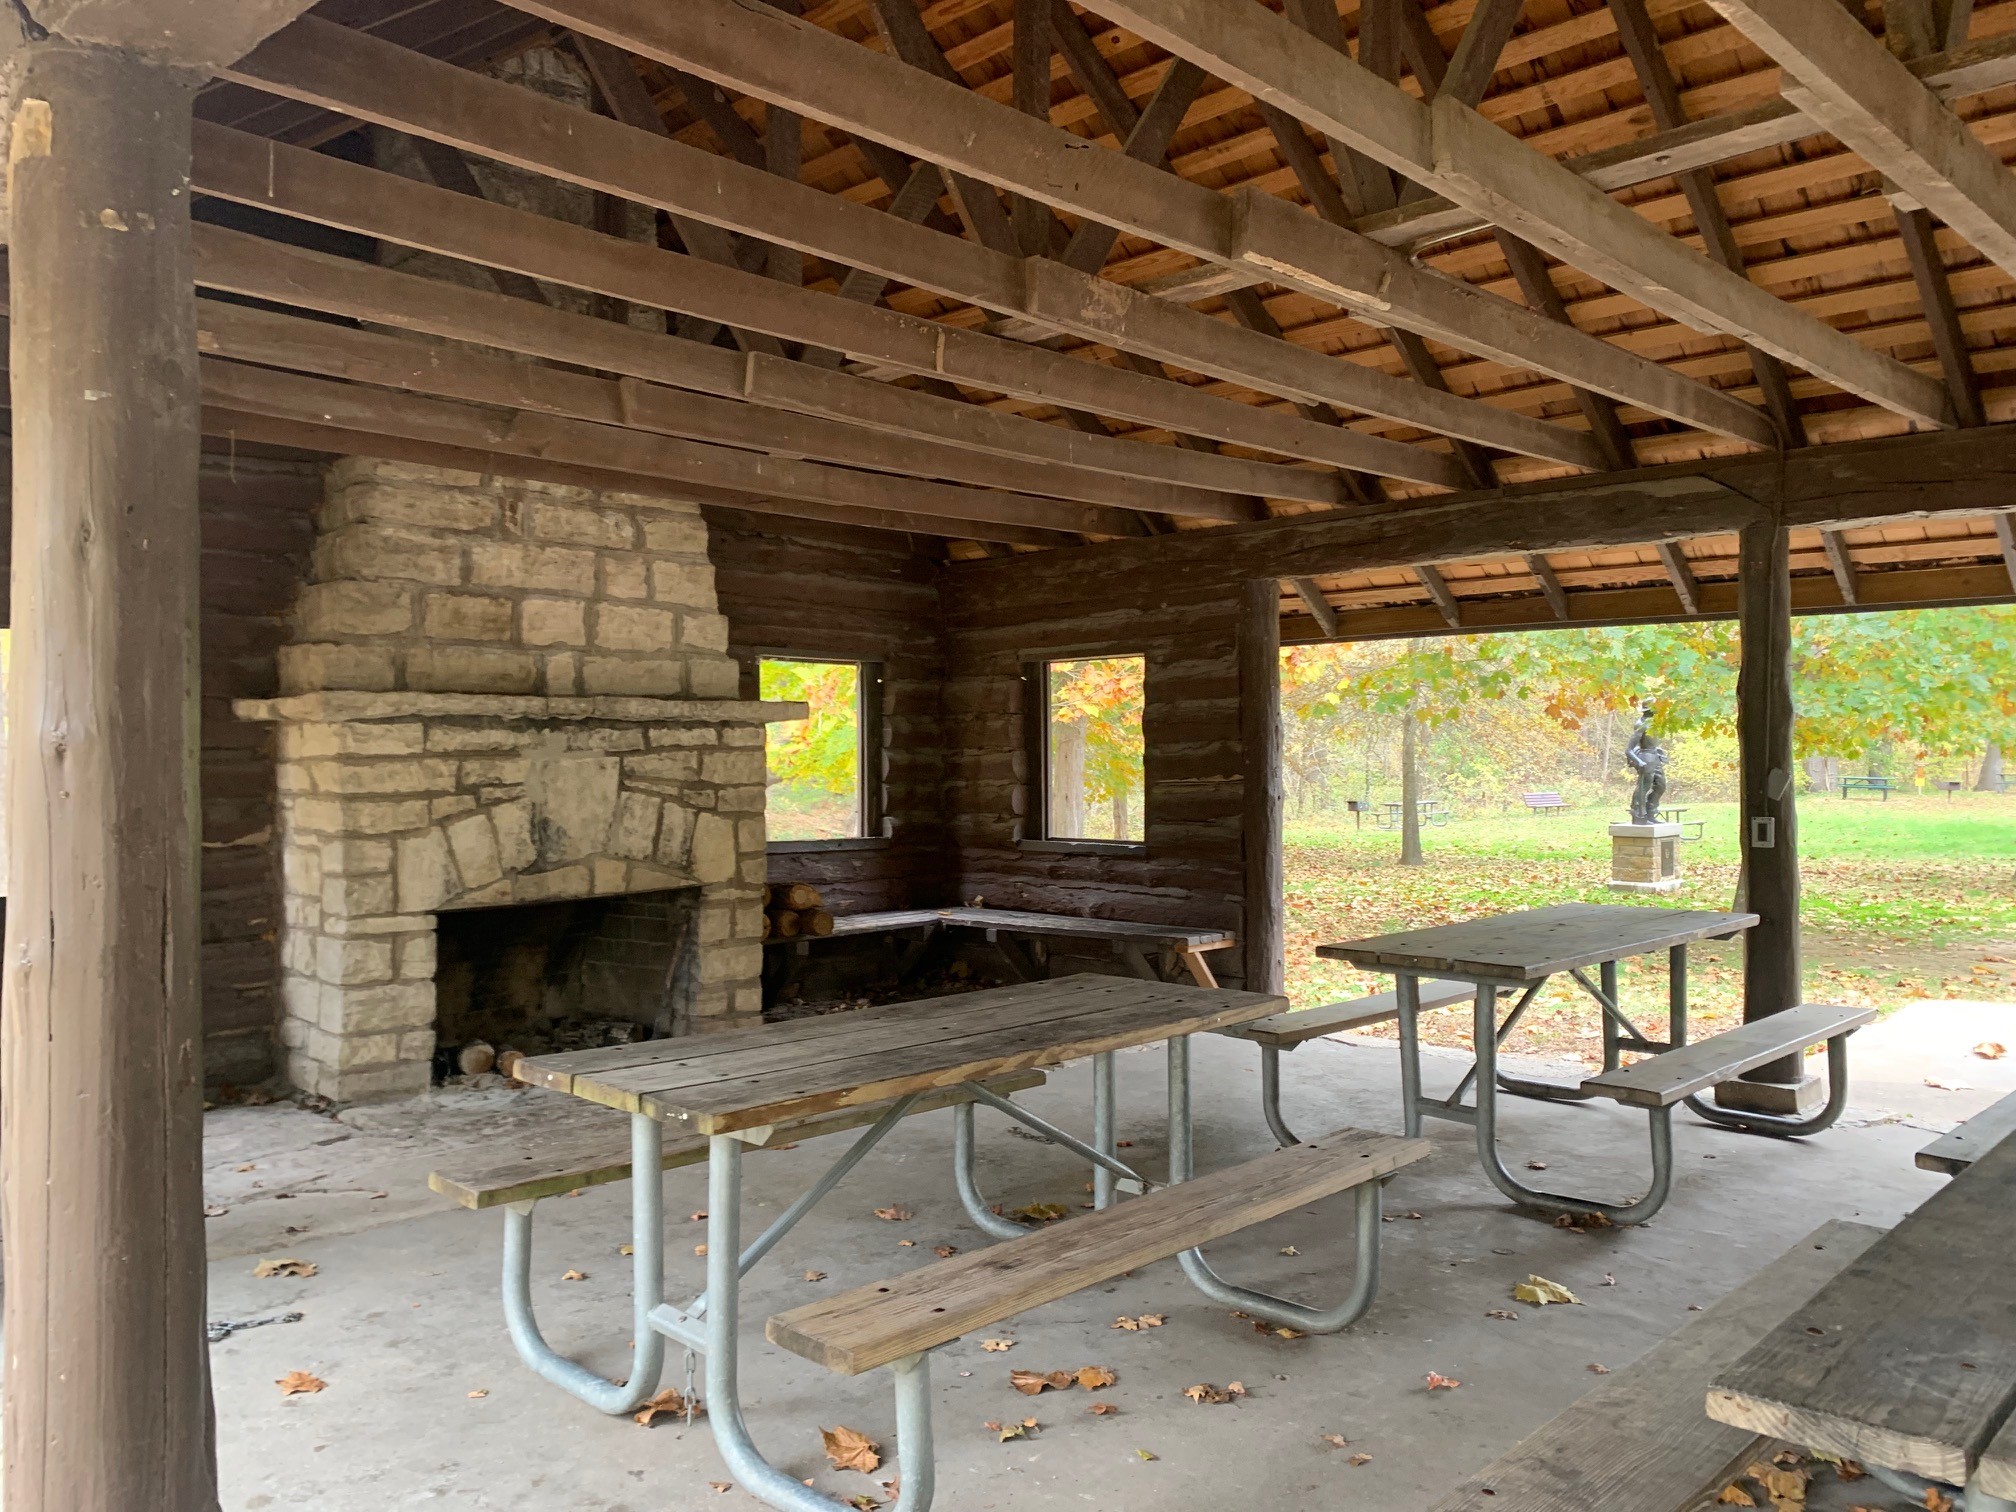 Wooden picnic tables and stone fireplace inside the open shelter